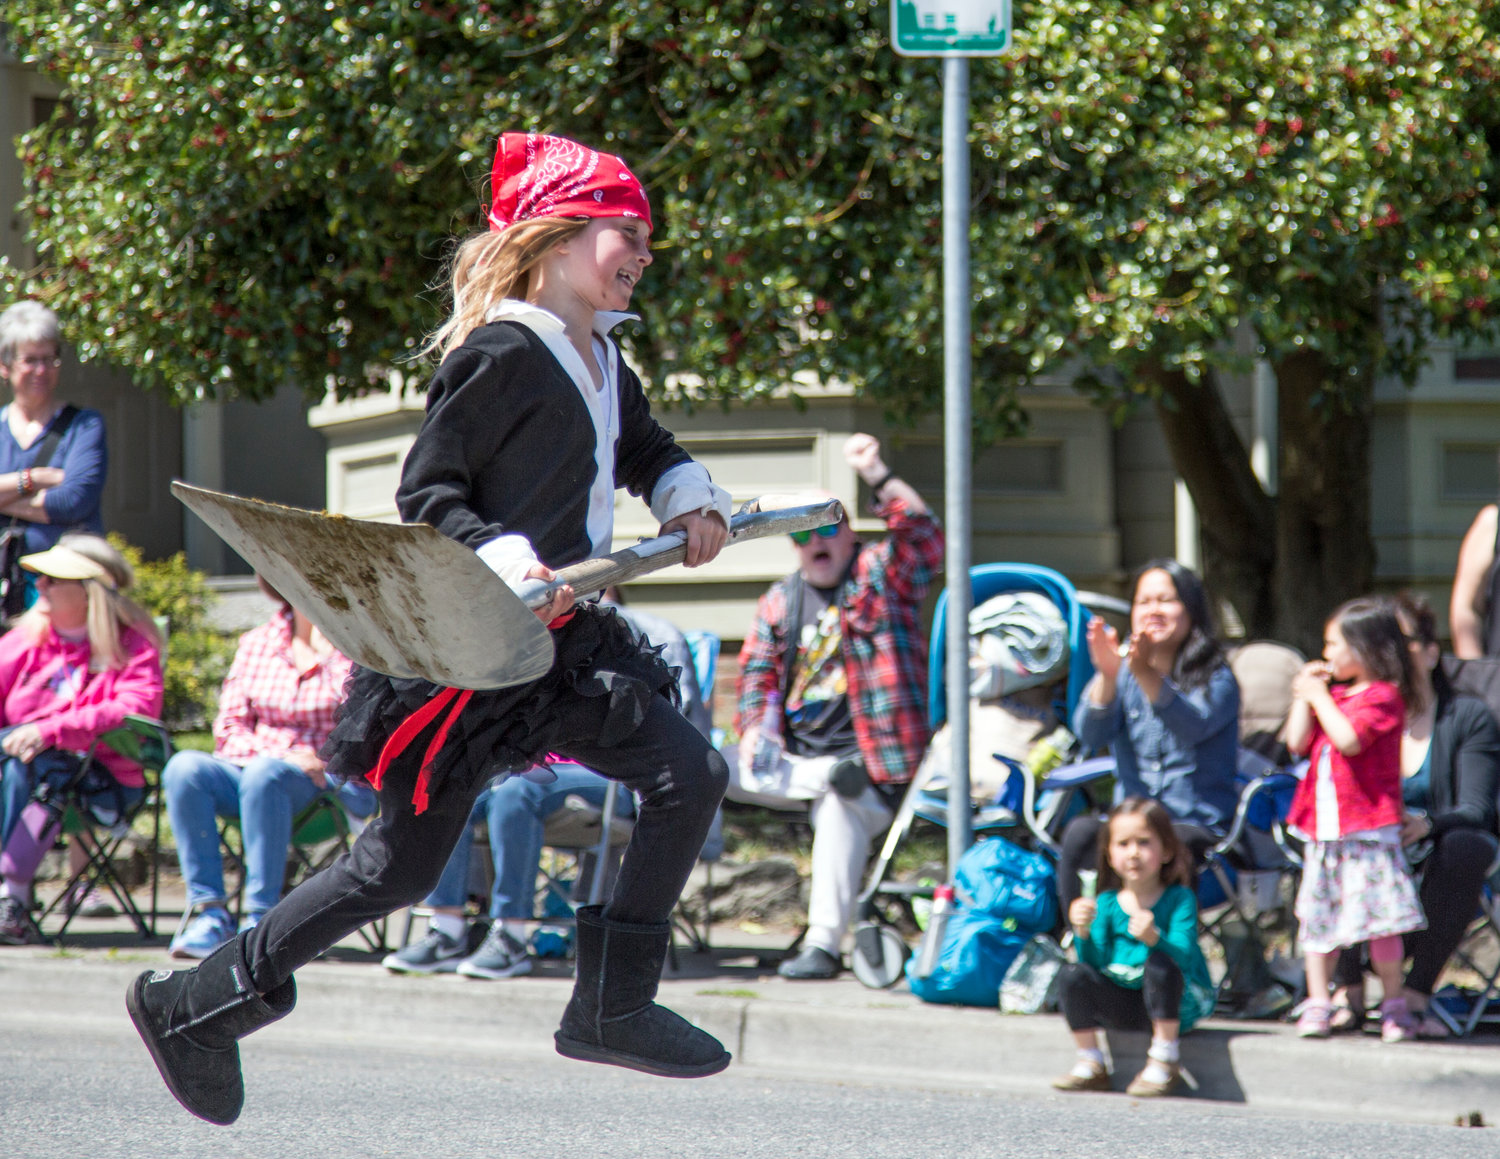 Sunny skies welcomed participants in the Rhodendron Festival’s Grand Parade during the big event’s pre-pandemic glory in 2019.